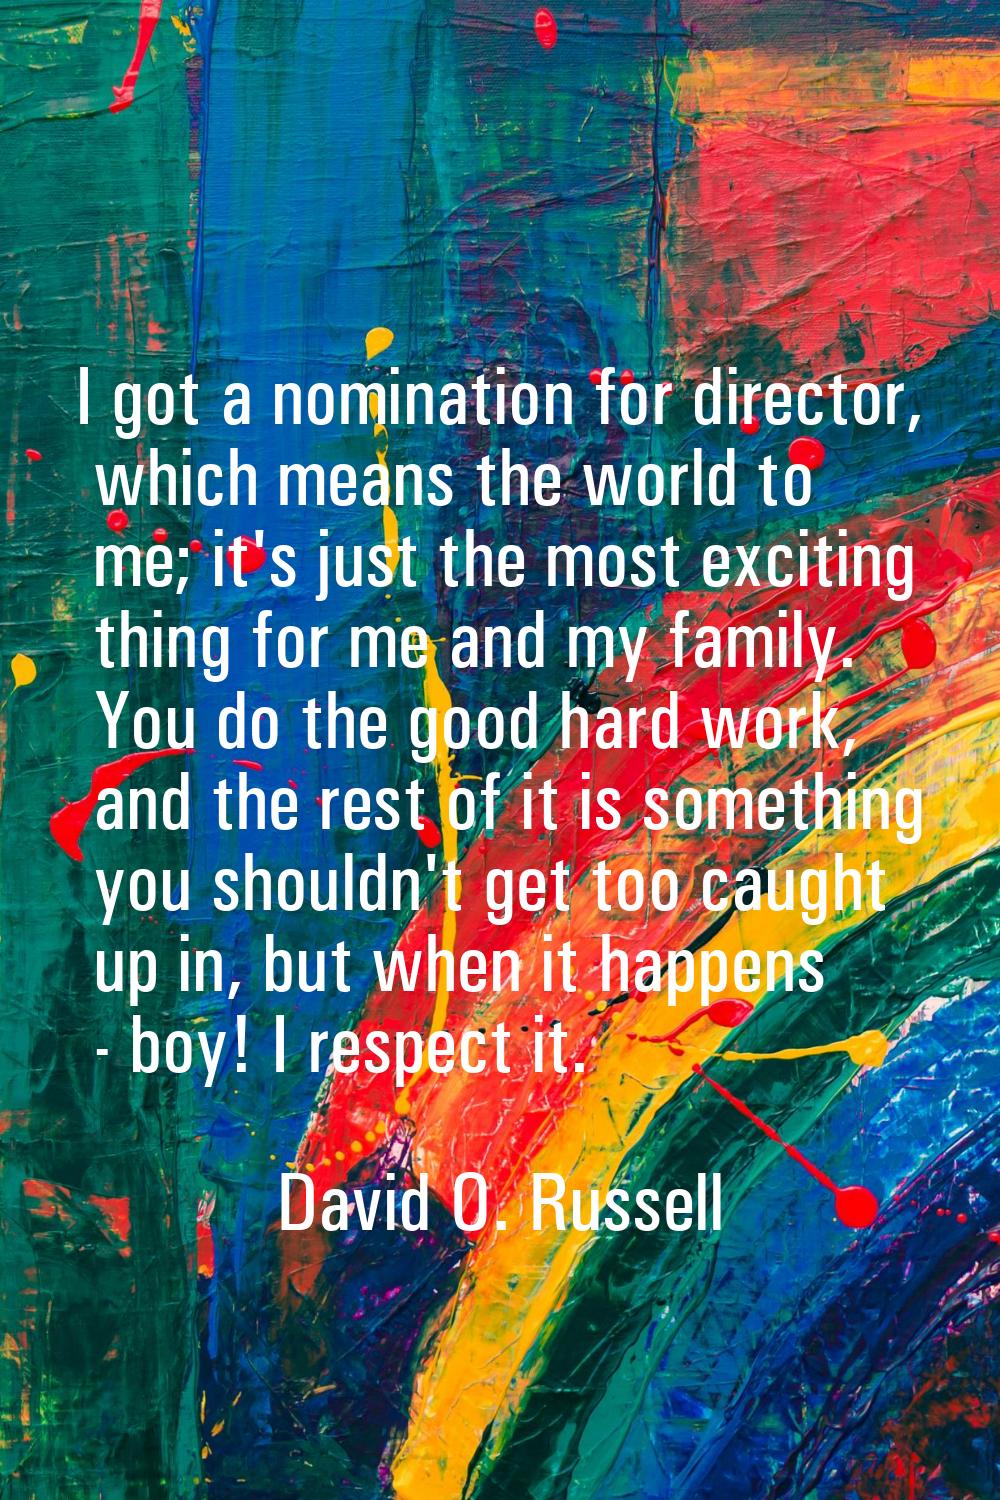 I got a nomination for director, which means the world to me; it's just the most exciting thing for